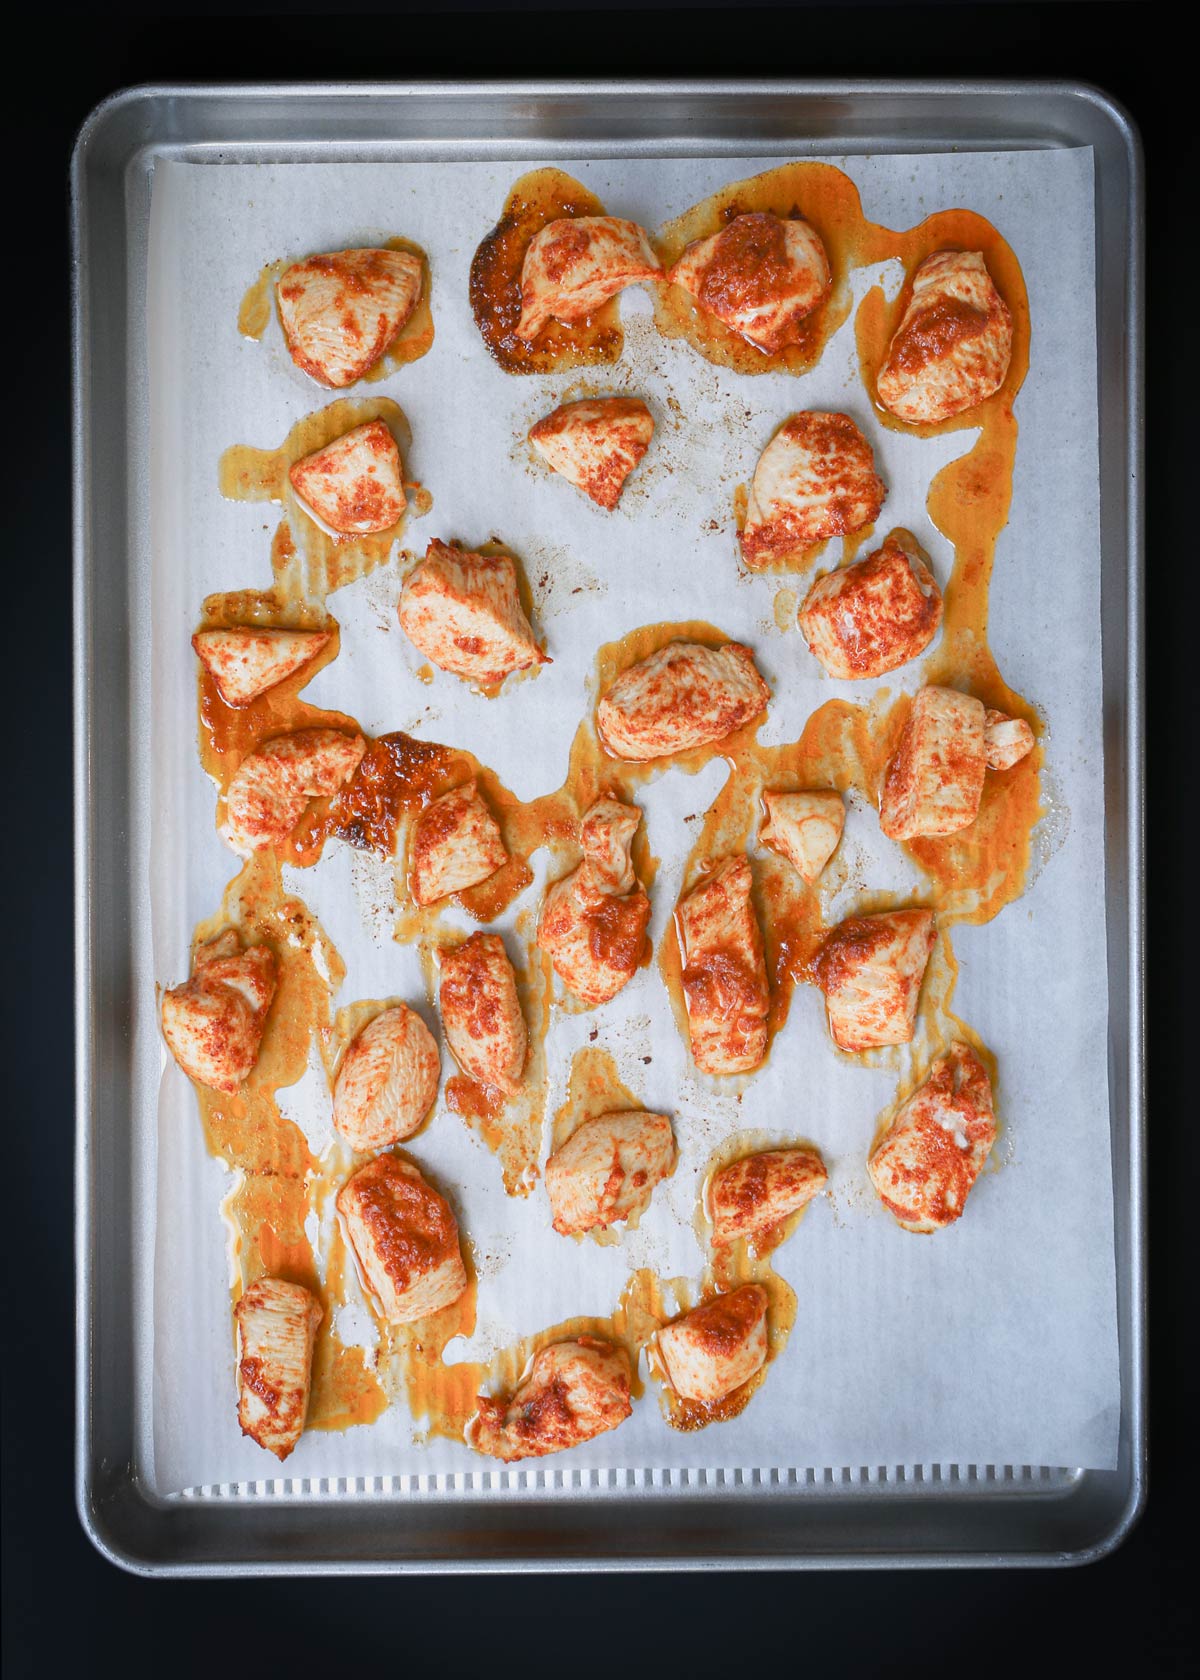 baked buffalo chicken bites on parchment-lined baking sheet.